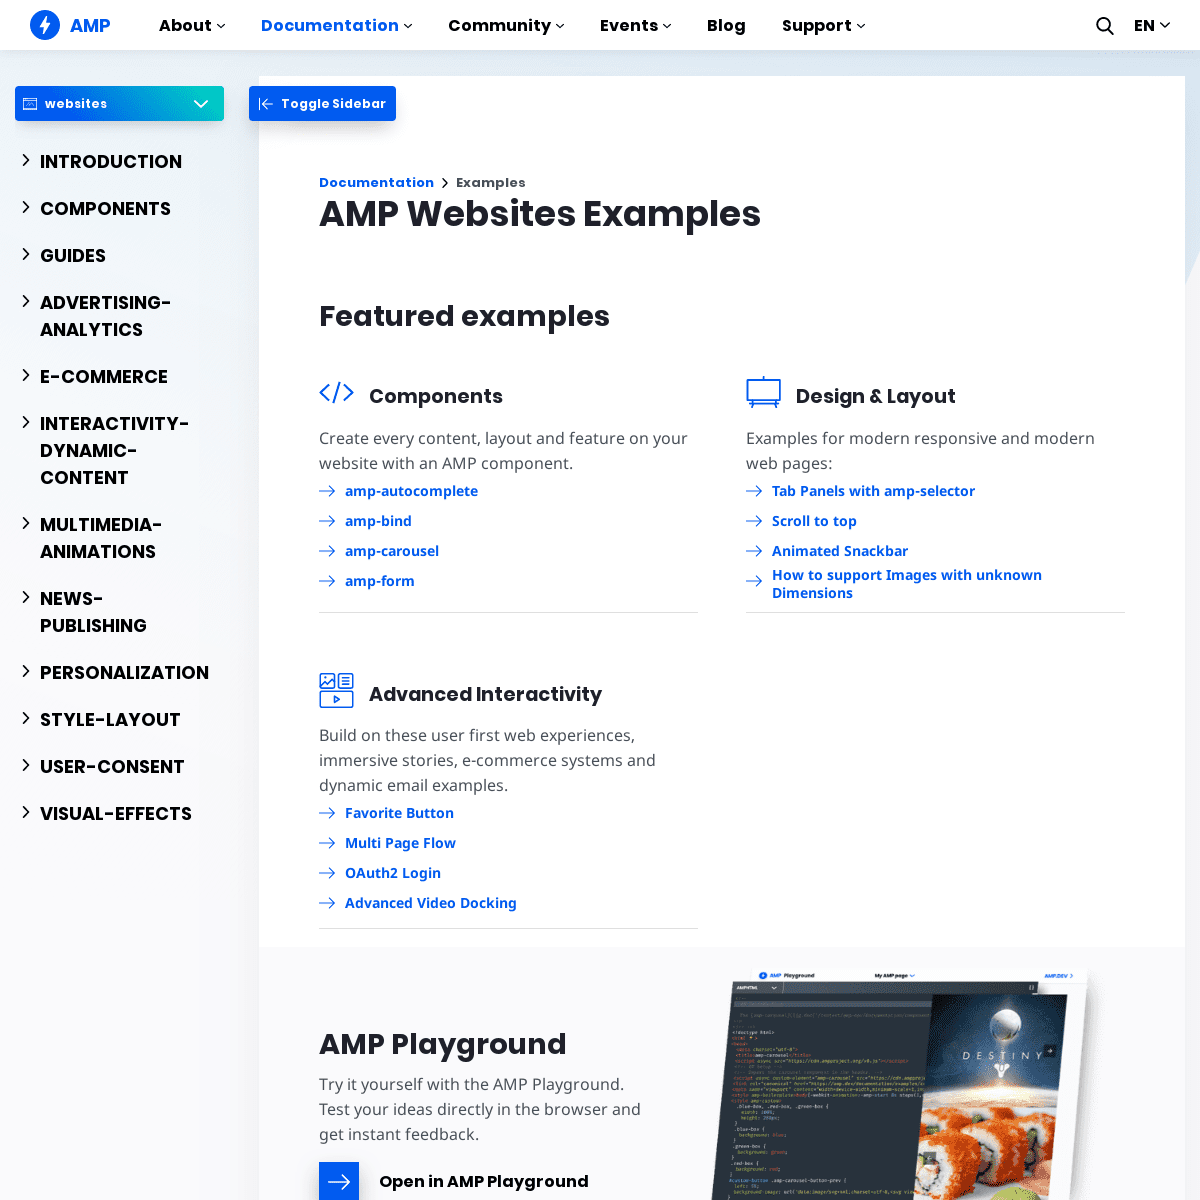 A complete backup of ampbyexample.com